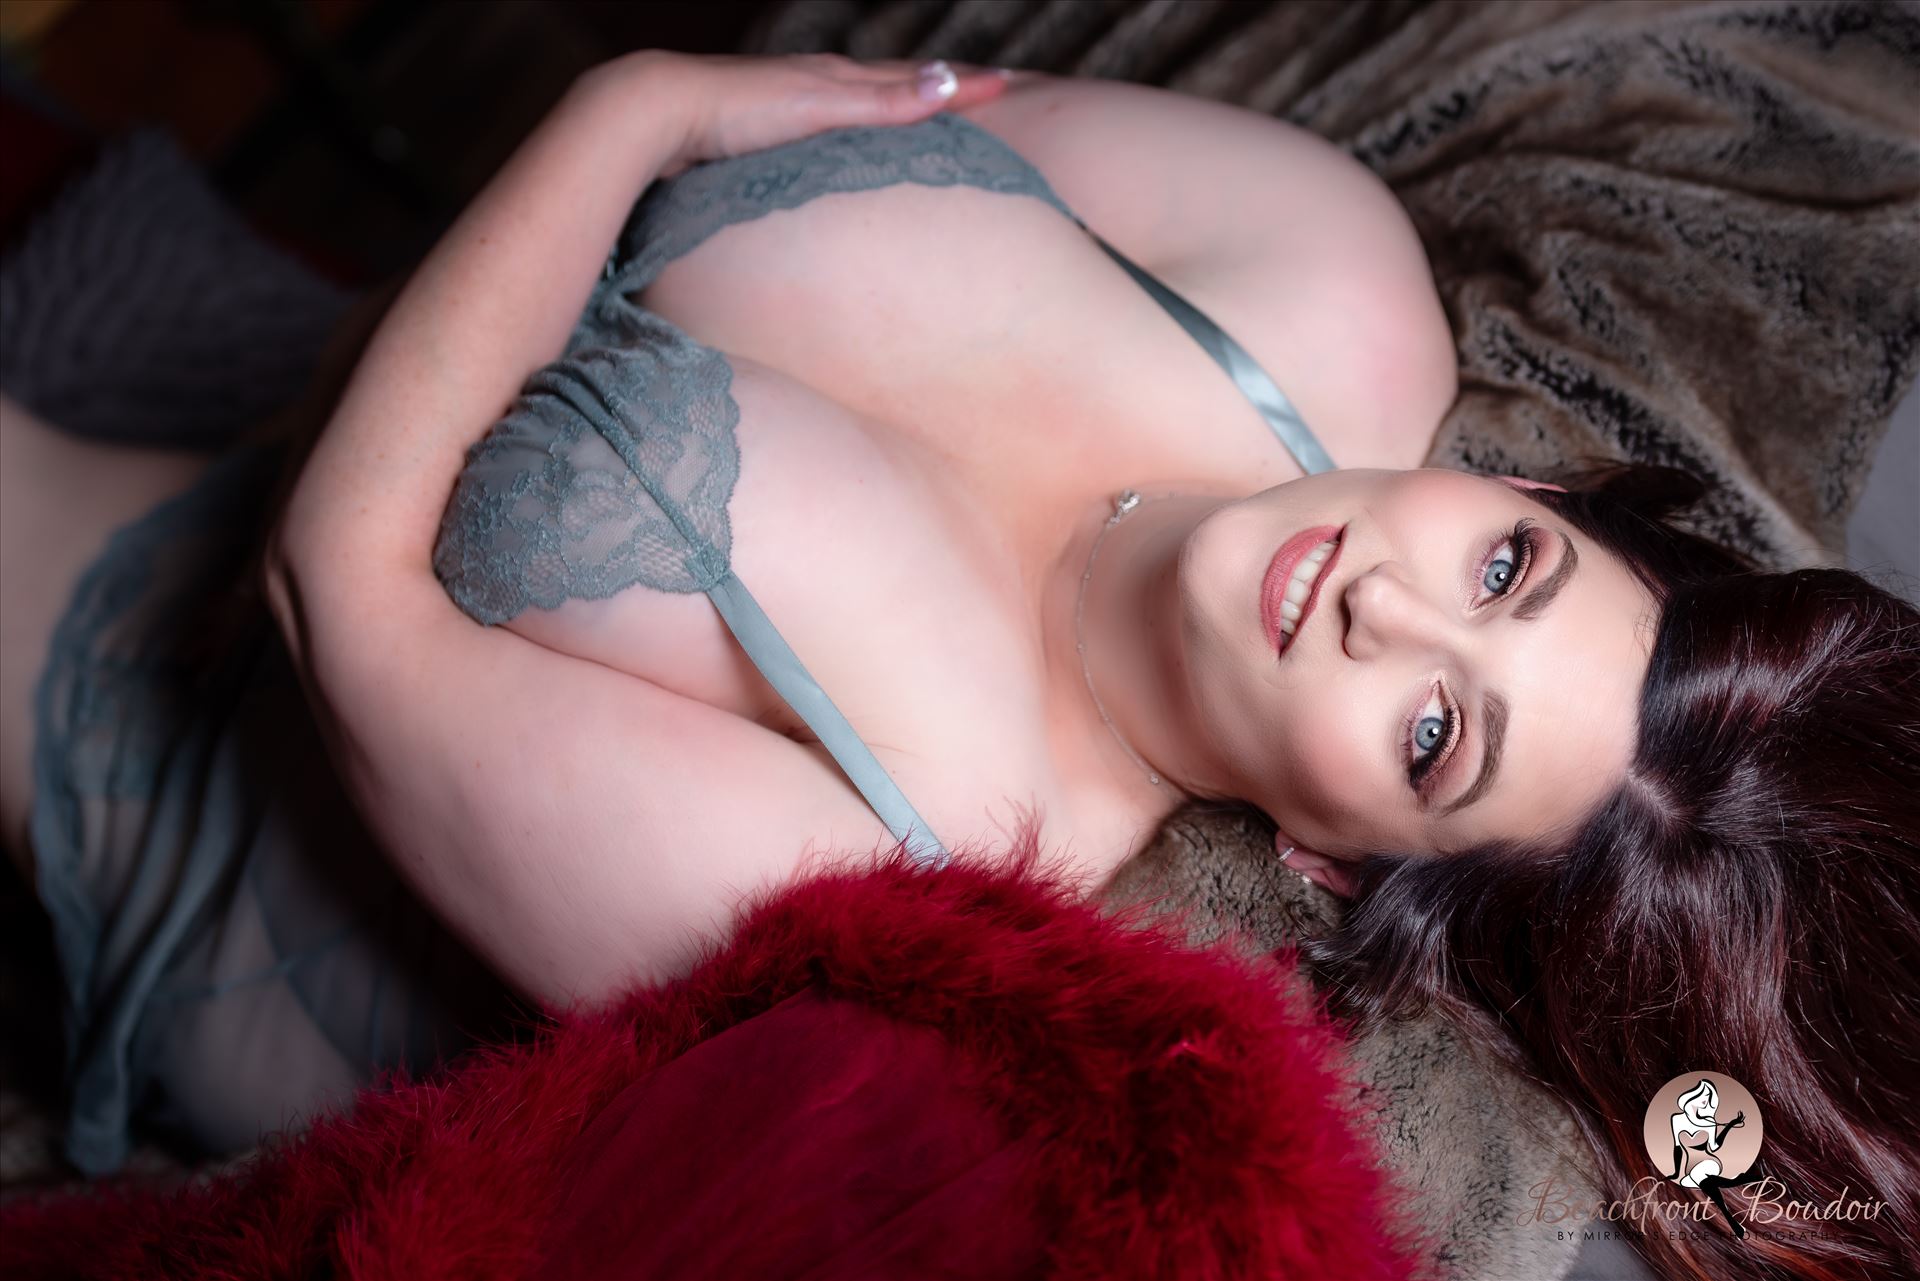 Port-.JPG Beachfront Boudoir by Mirror's Edge Photography is a Boutique Luxury Boudoir Photography Studio located just blocks from the beach in Oceano, California. My mission is to show as many women as possible how beautiful they truly are! Curvy boudoir. by Sarah Williams